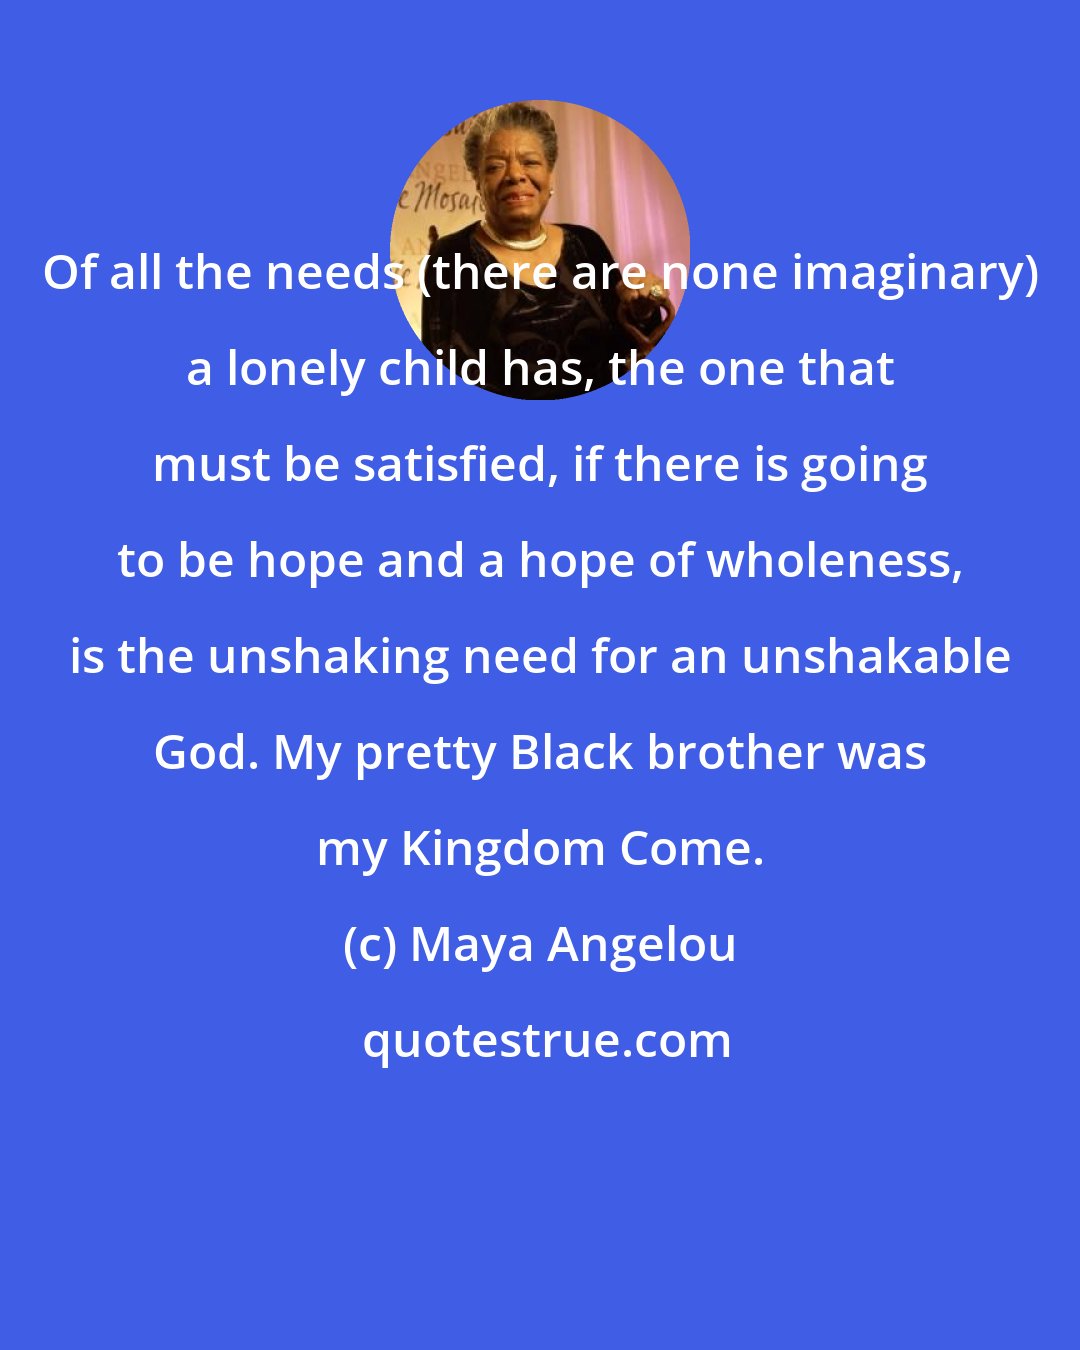 Maya Angelou: Of all the needs (there are none imaginary) a lonely child has, the one that must be satisfied, if there is going to be hope and a hope of wholeness, is the unshaking need for an unshakable God. My pretty Black brother was my Kingdom Come.